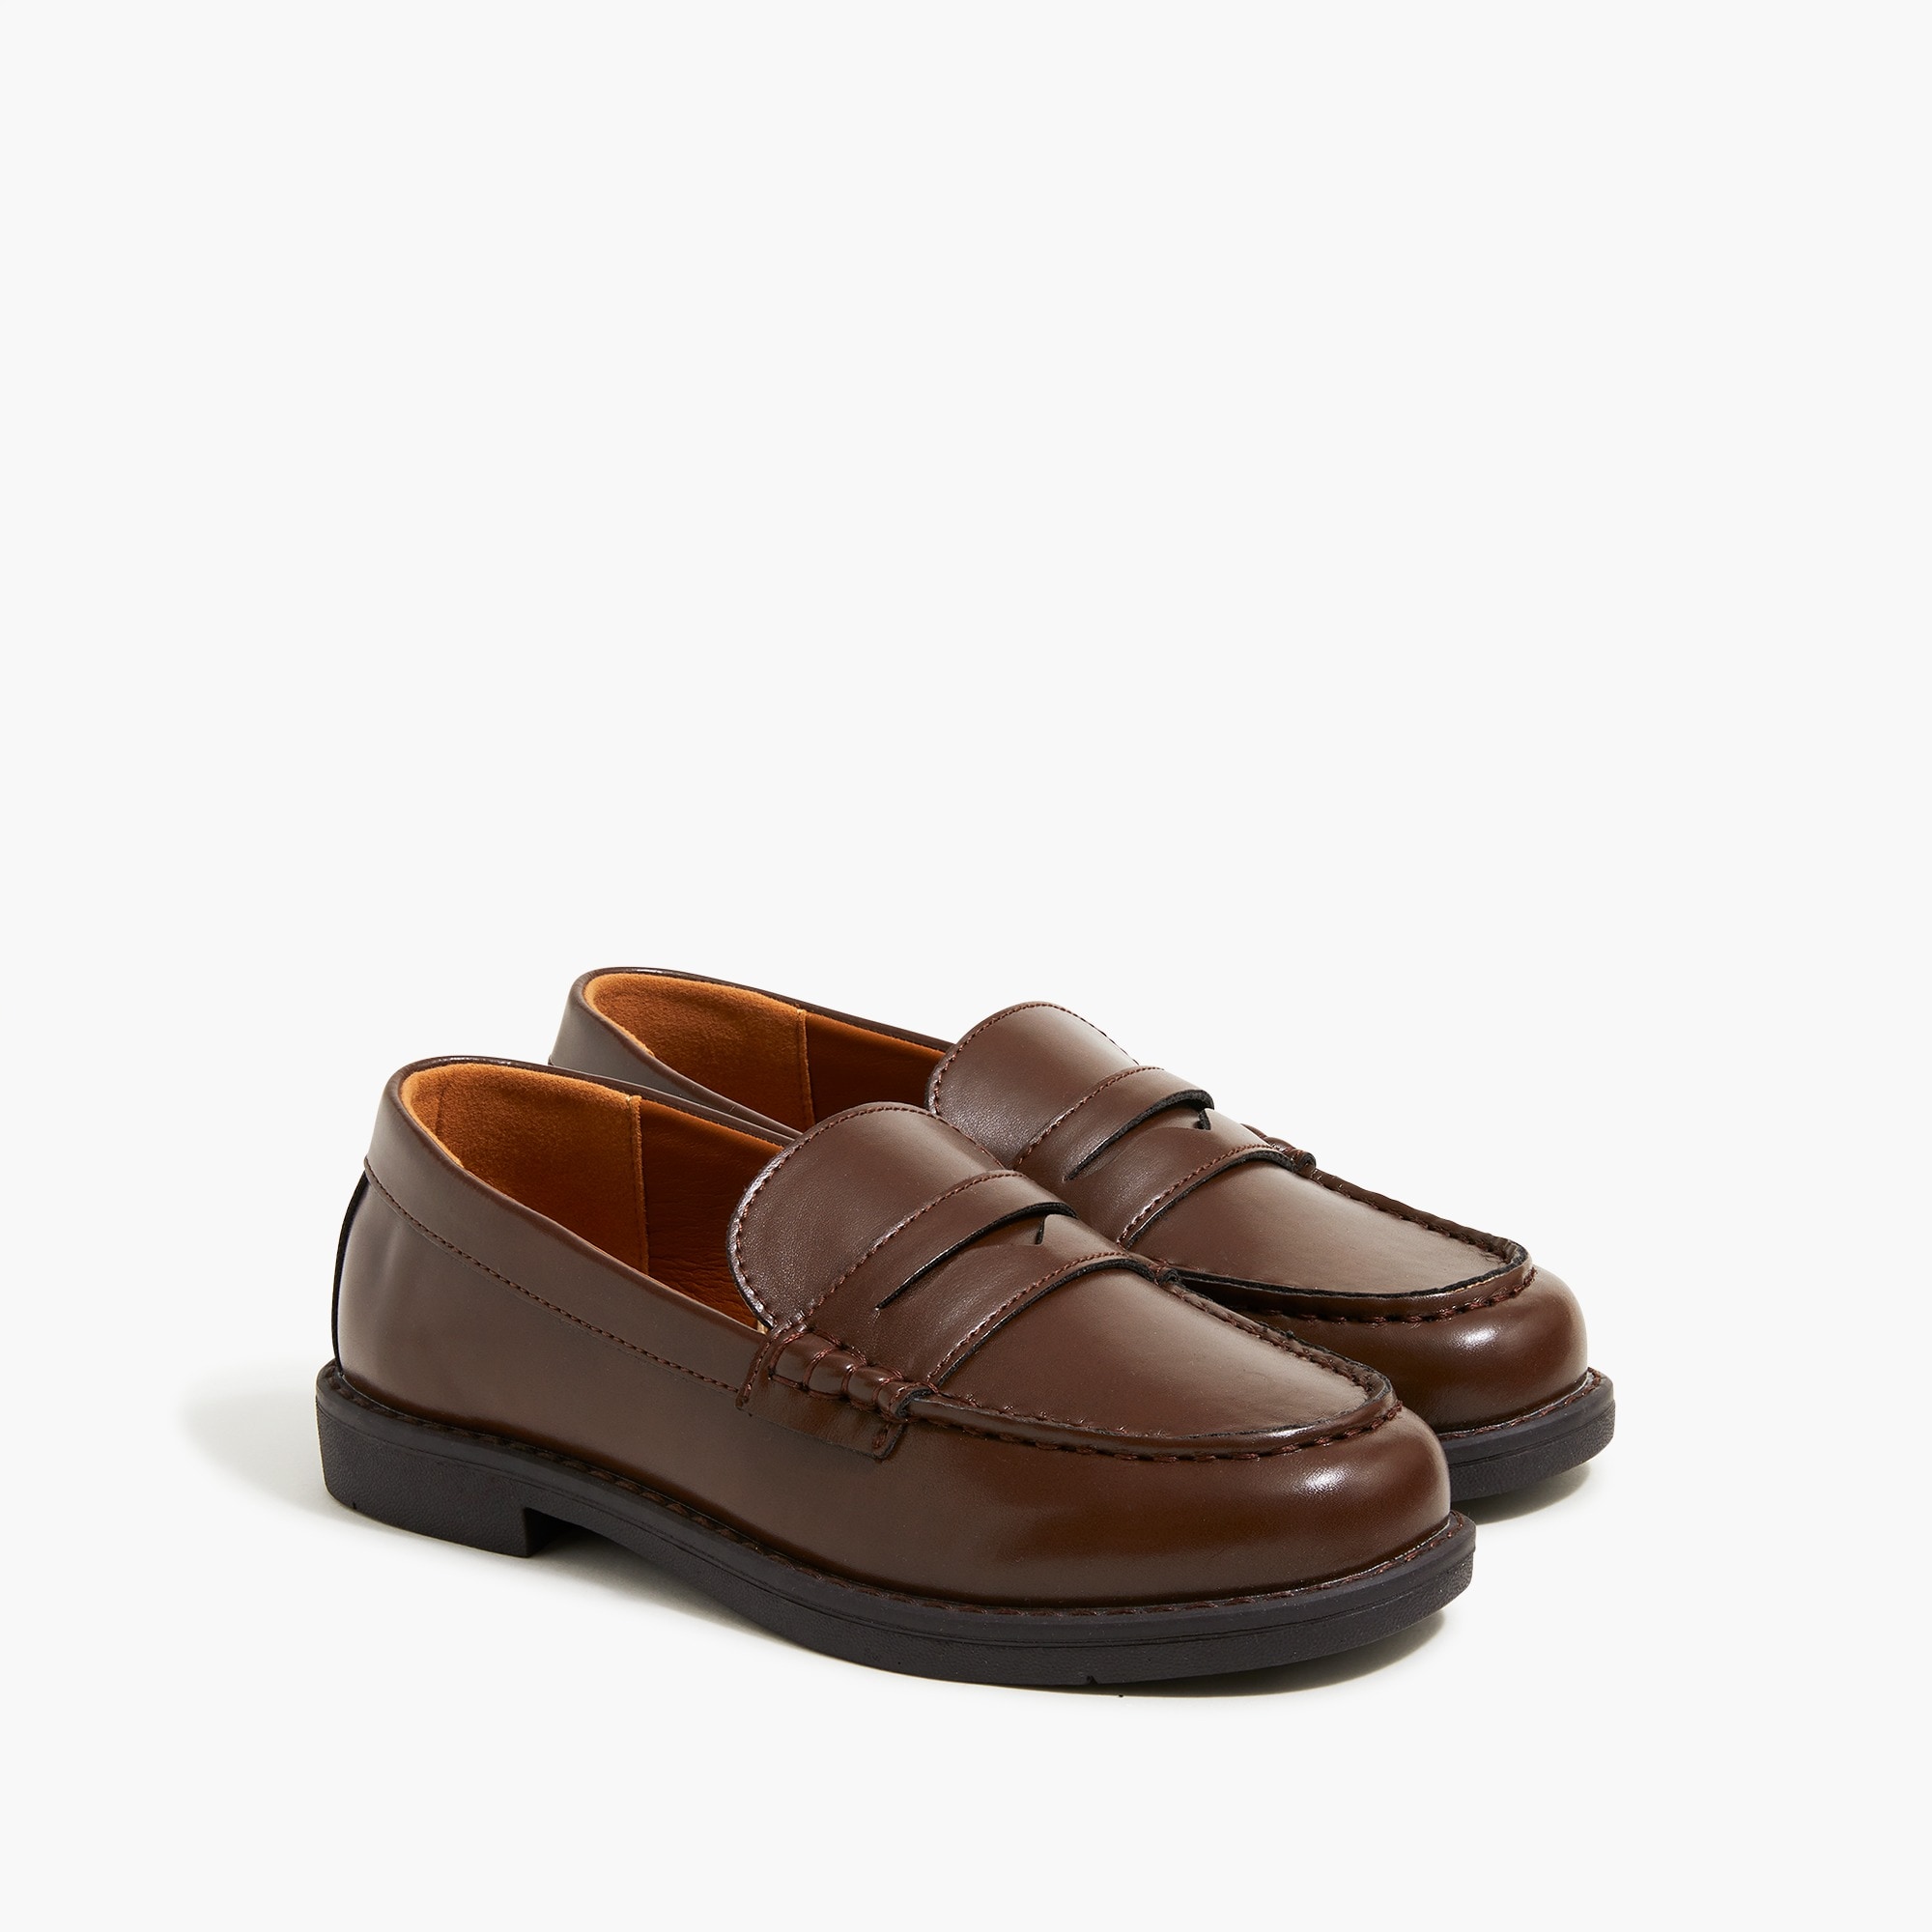  Boys' penny loafers